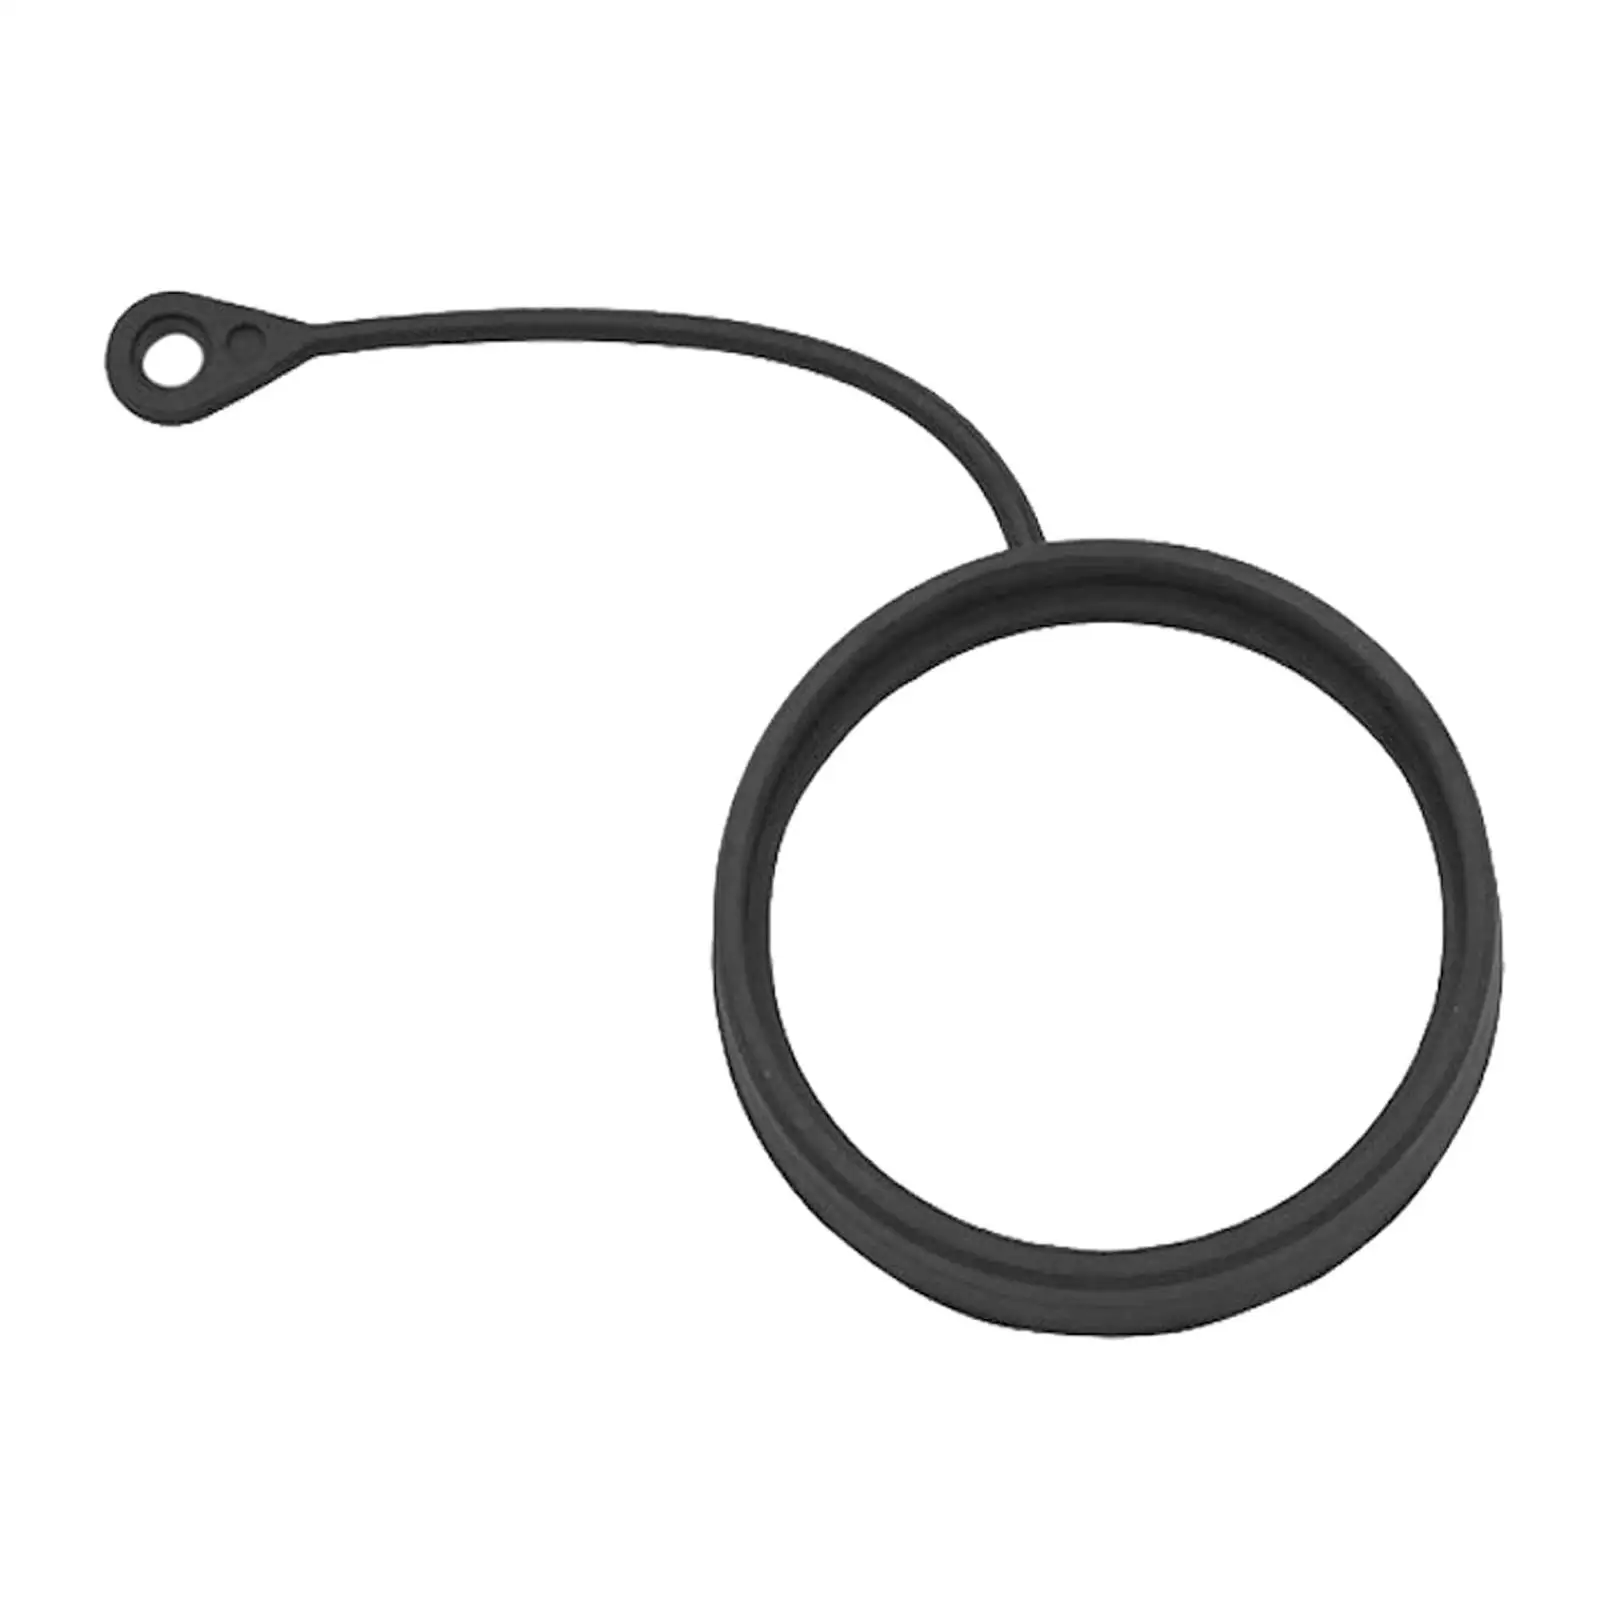 Vehicle Fuel Tank Caps Cord Line Wire Replacement ABS Black A2214700605 Fuel Gas Tether Ring Strap for E C B A